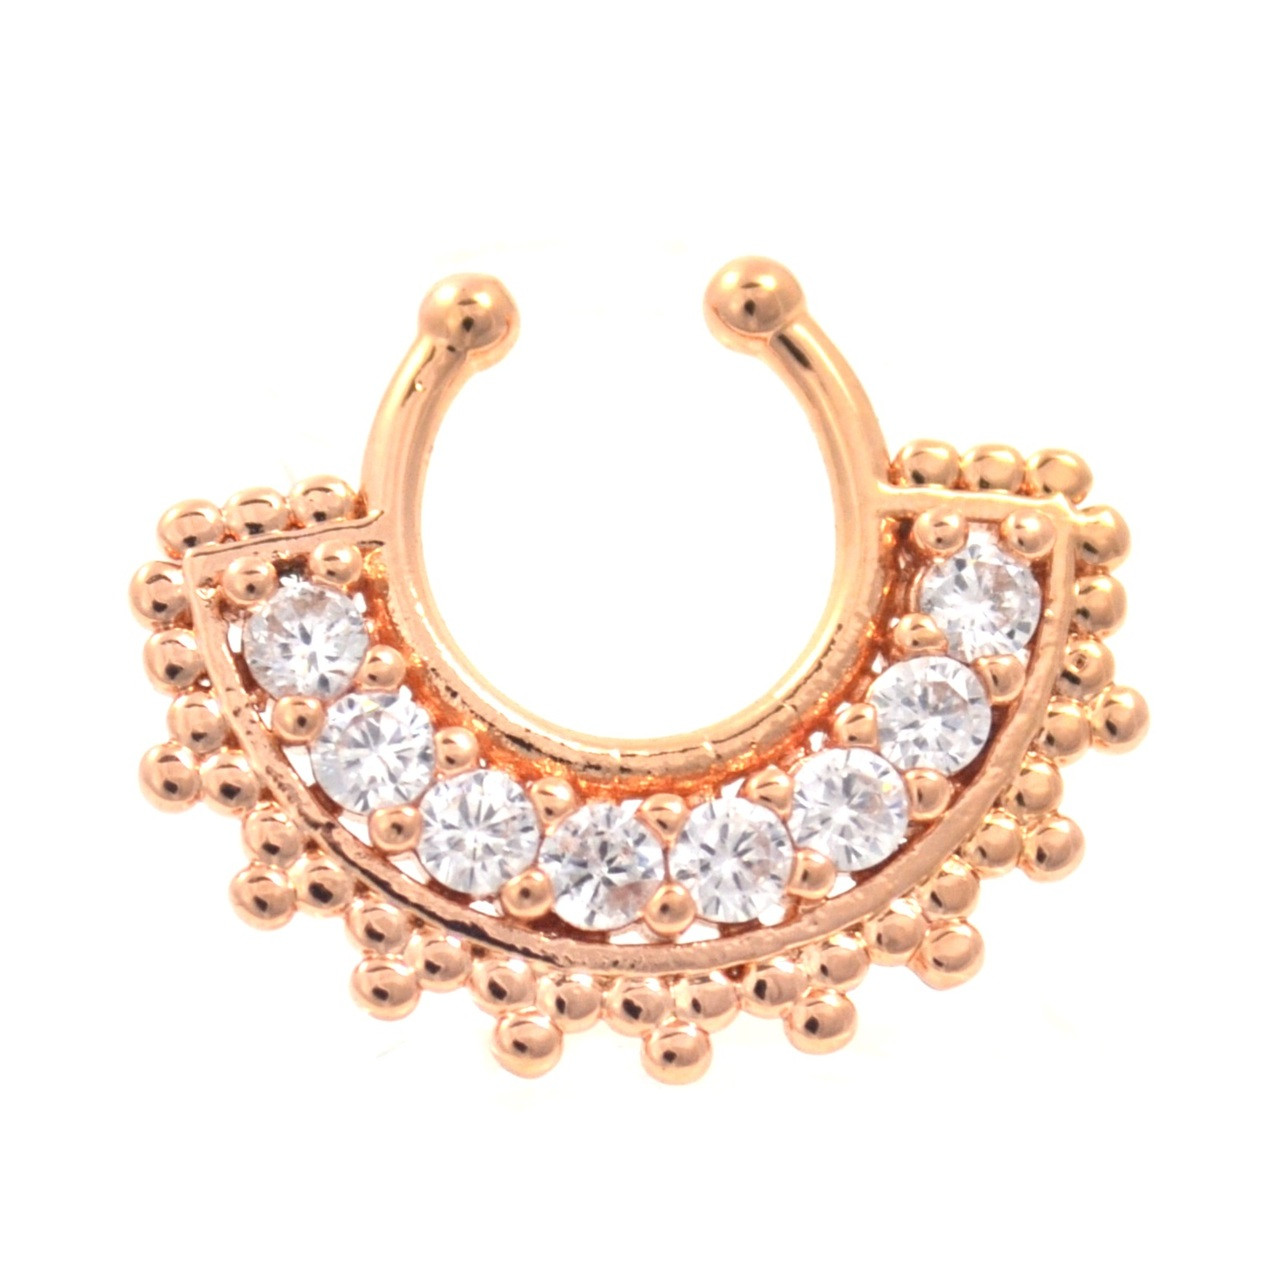 Intricate Gemmed Rose Gold Fake Septum Ring Jewelry | 0